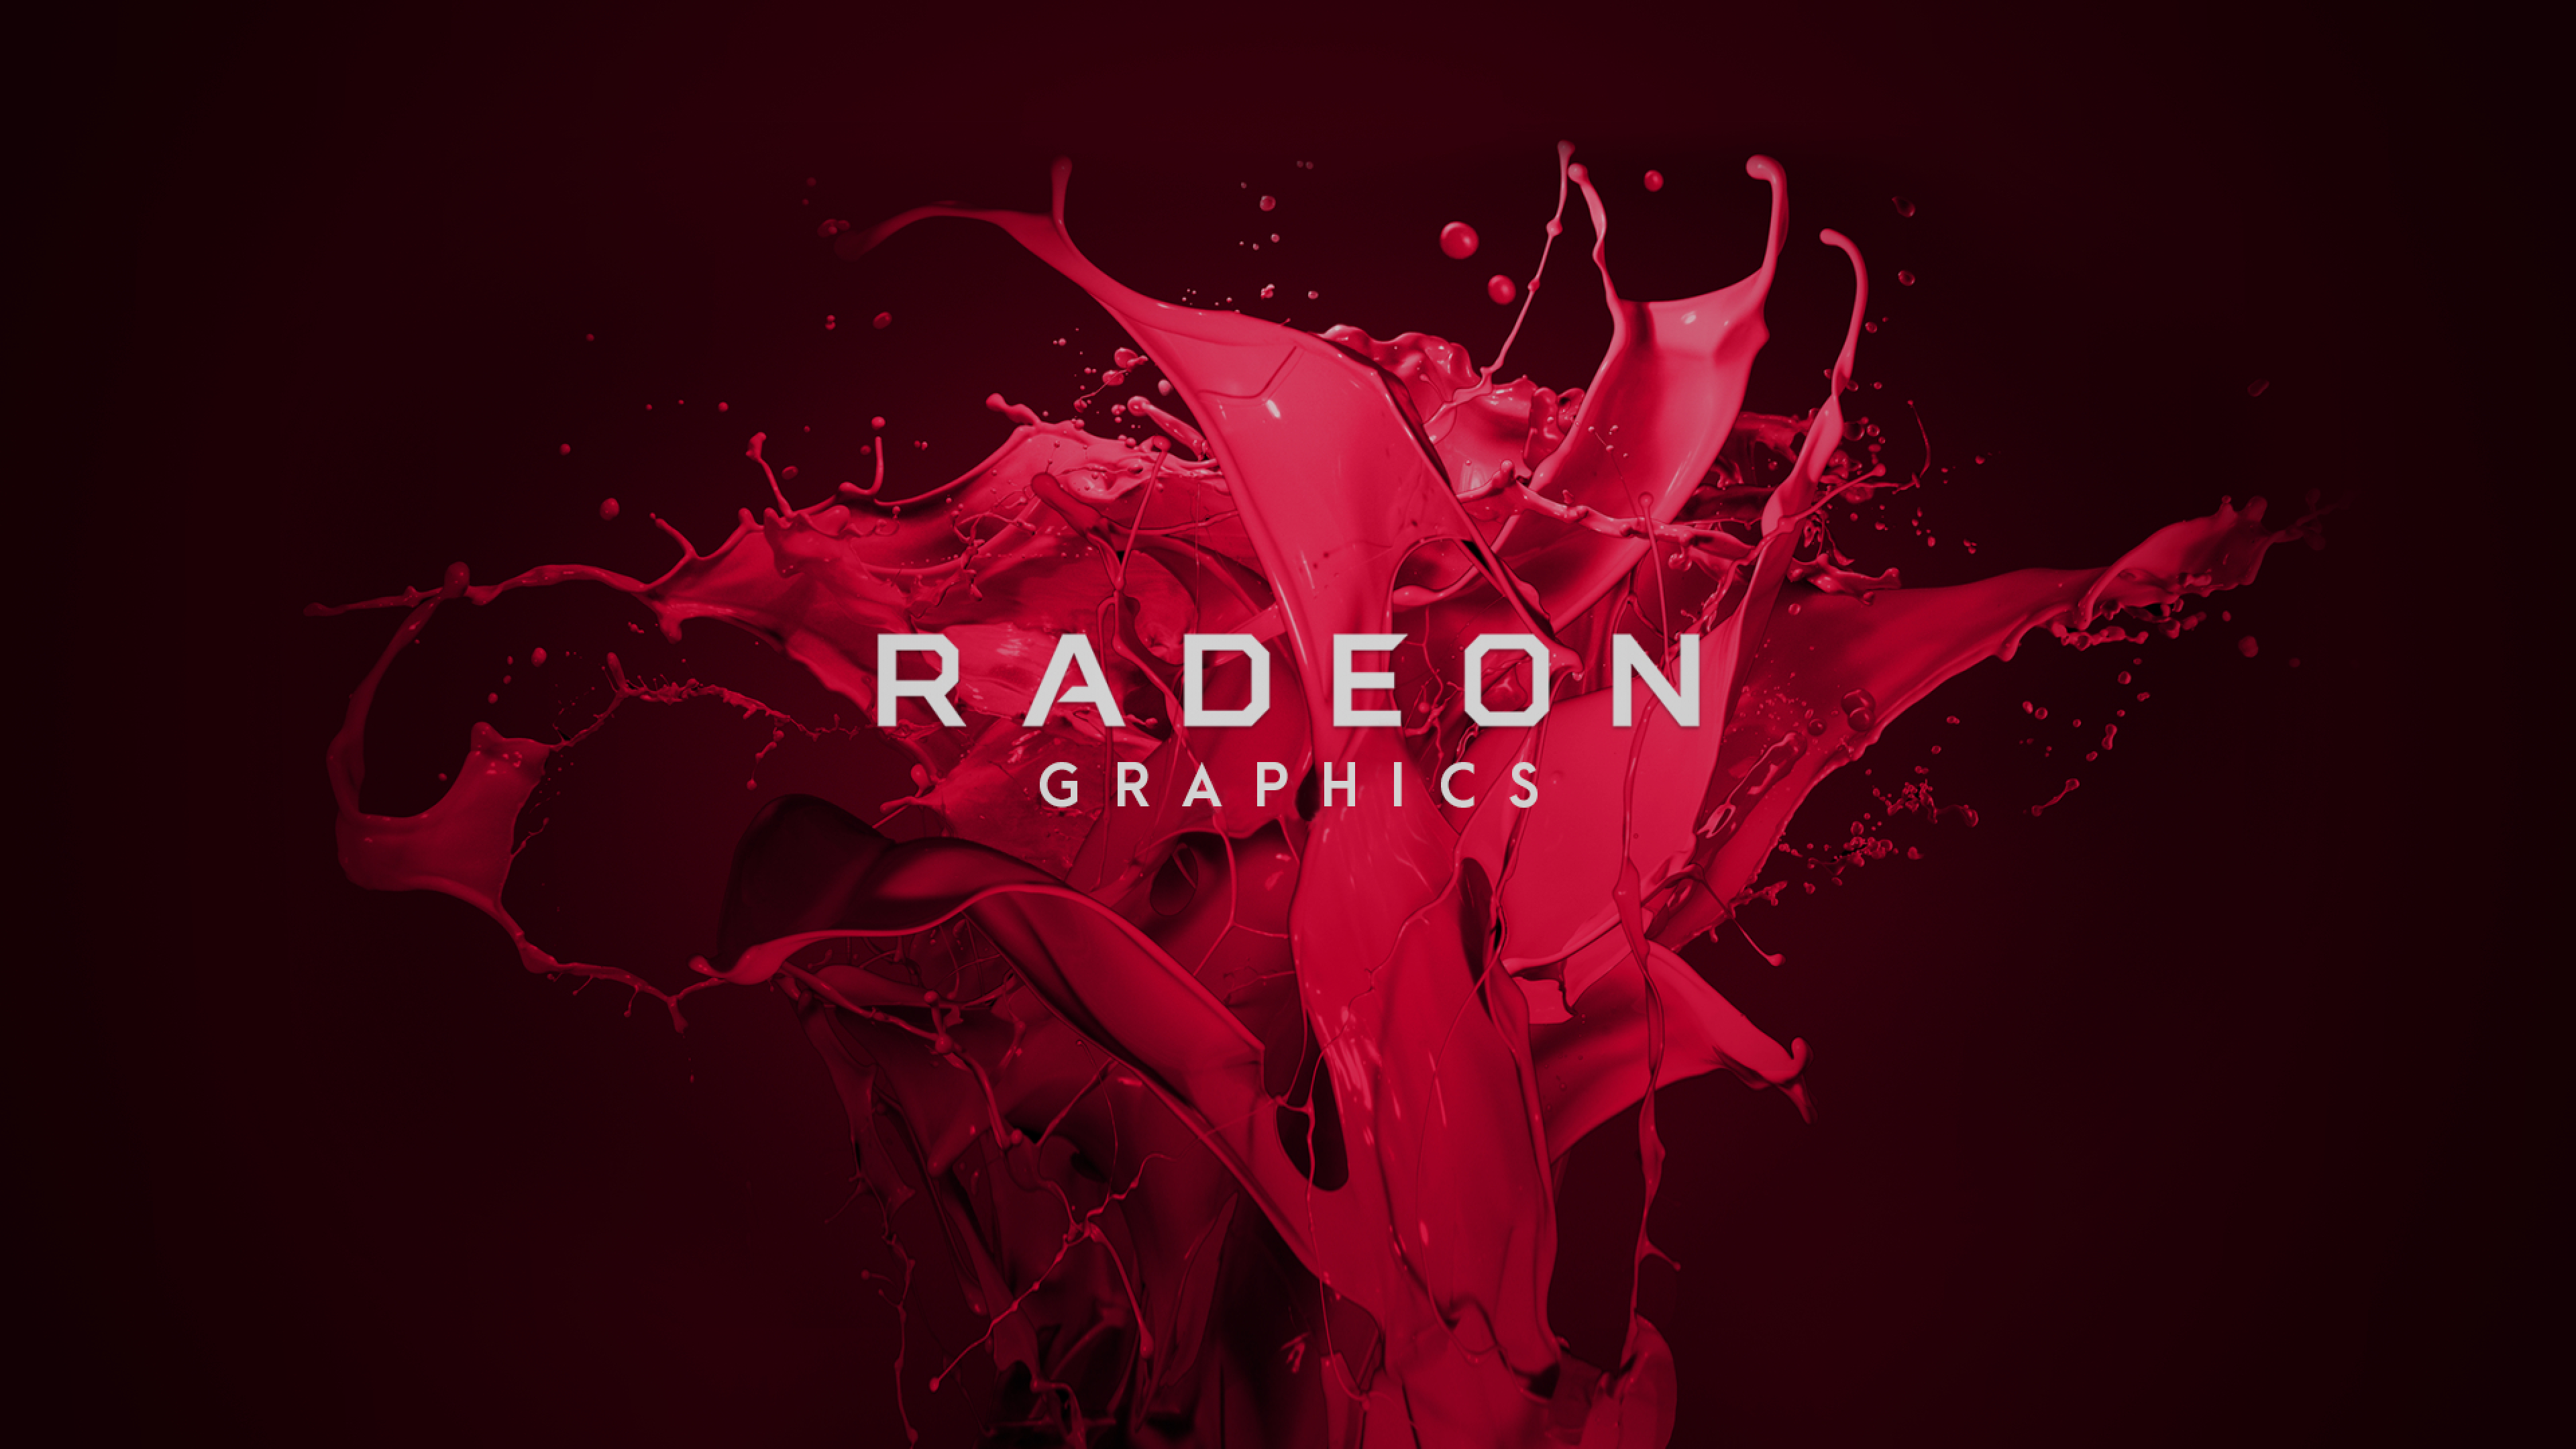 3840x2160 Amd Radeon Graphic 4k Wallpaper Hd Hi Tech 4k Wallpapers Images Photos And Background